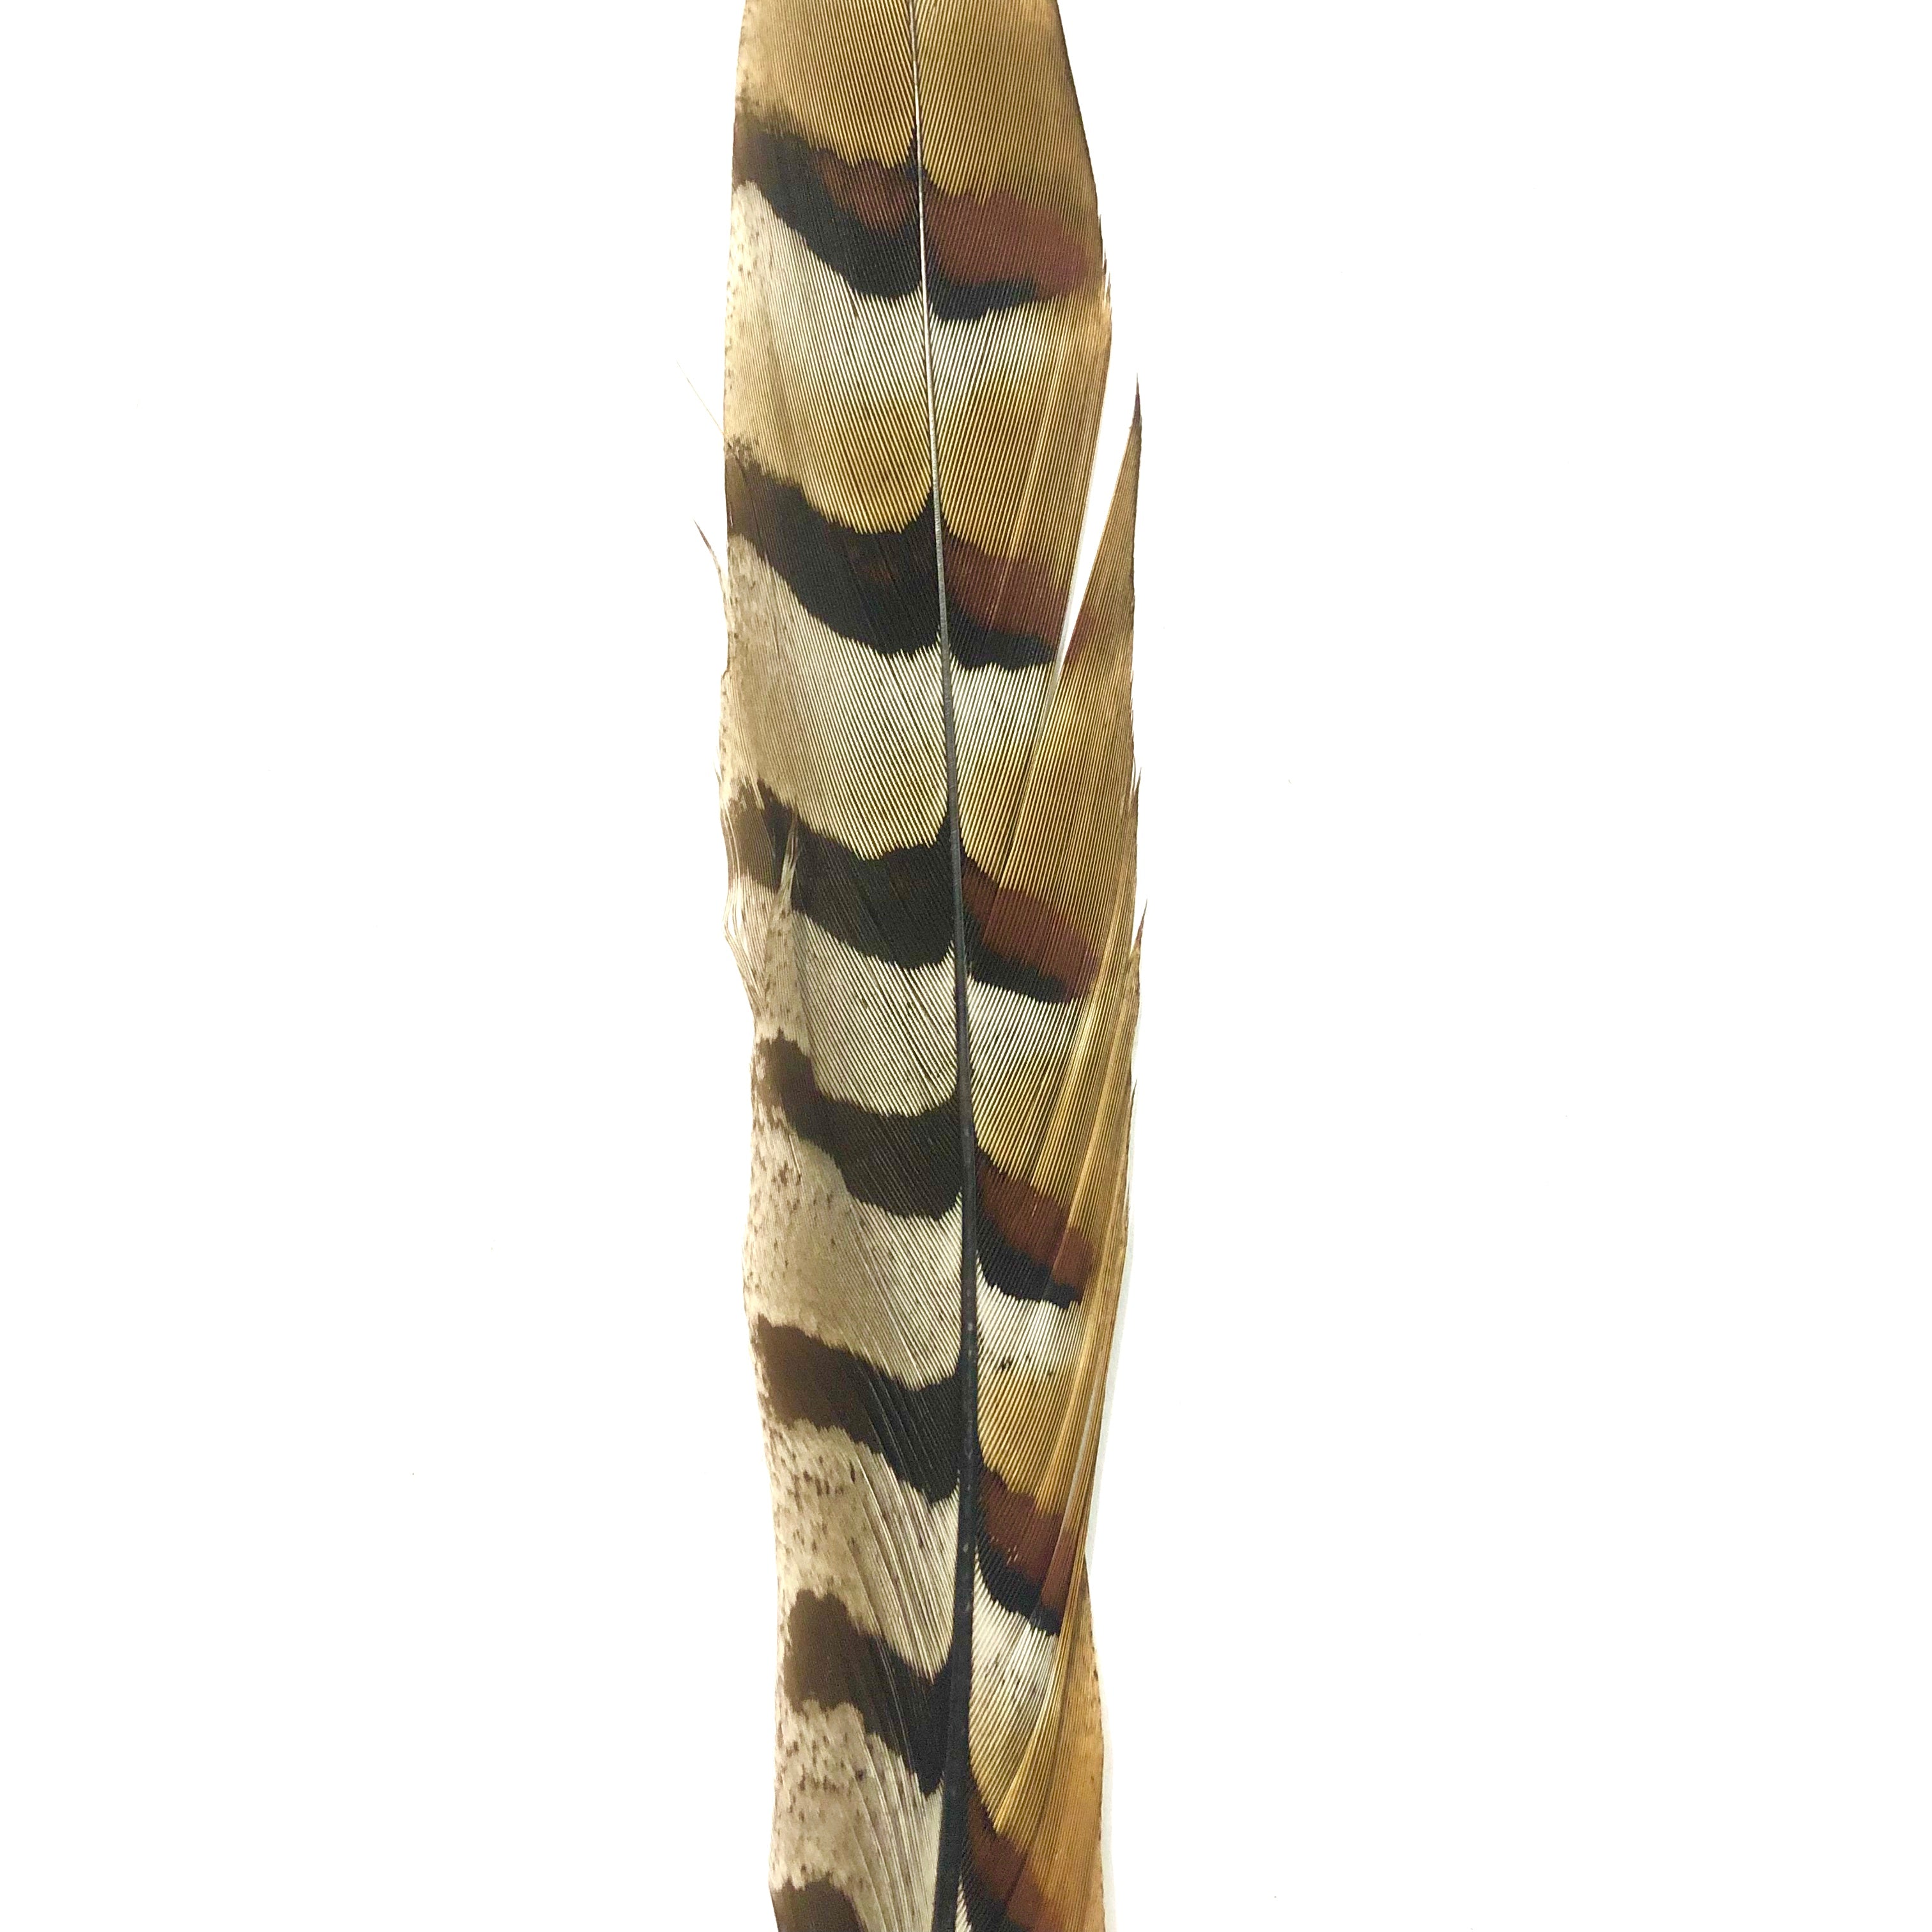 8" to 10" Reeves Pheasant Tail Feather - Natural